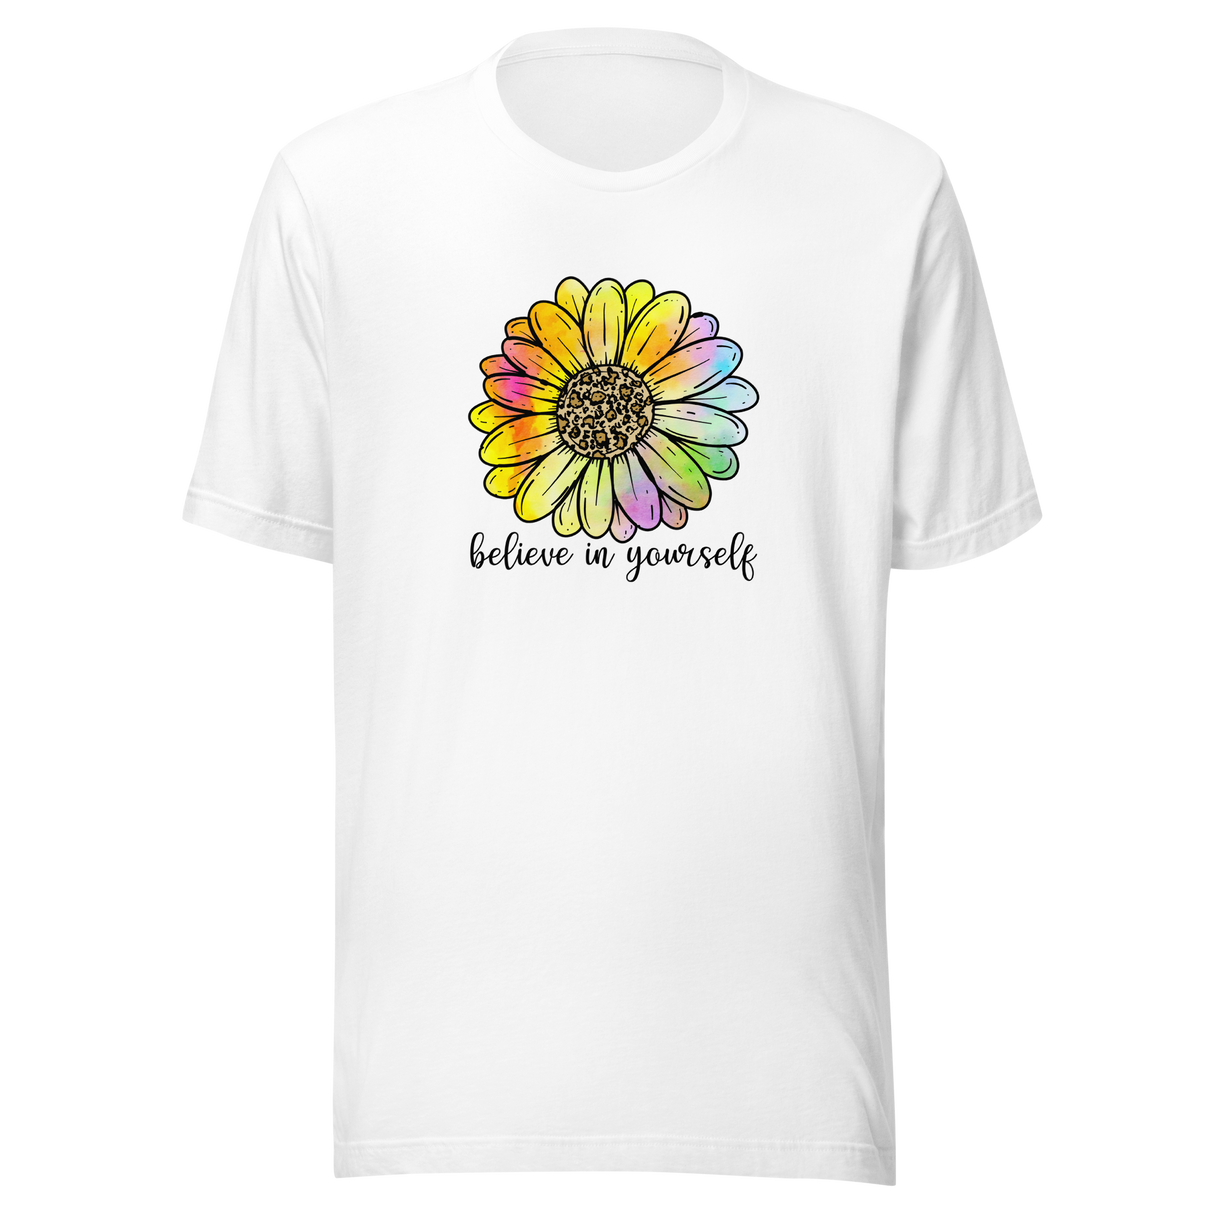 believe-in-yourself-believe-tee-life-t-shirt-mental-health-tee-t-shirt-tee#color_white